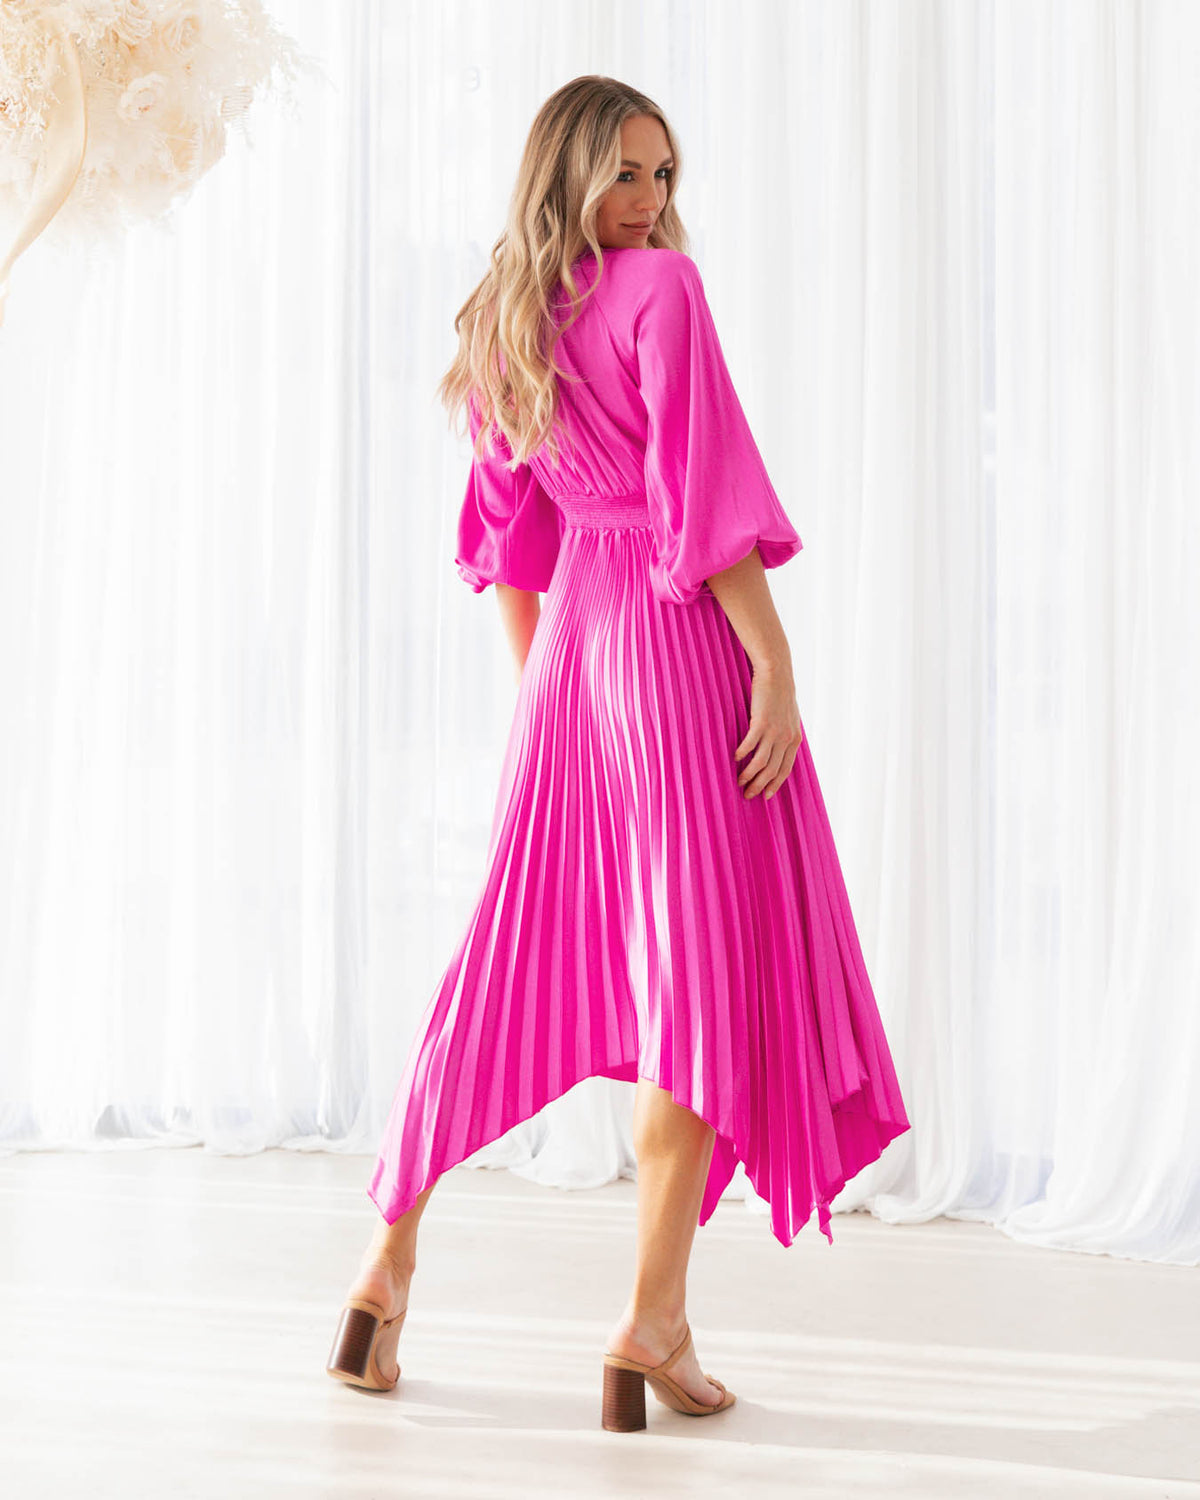 A model is wearing a pink pleated keyhole midi dress with balloon sleeves from the Ebby and I collection designed by Global Fashion House.